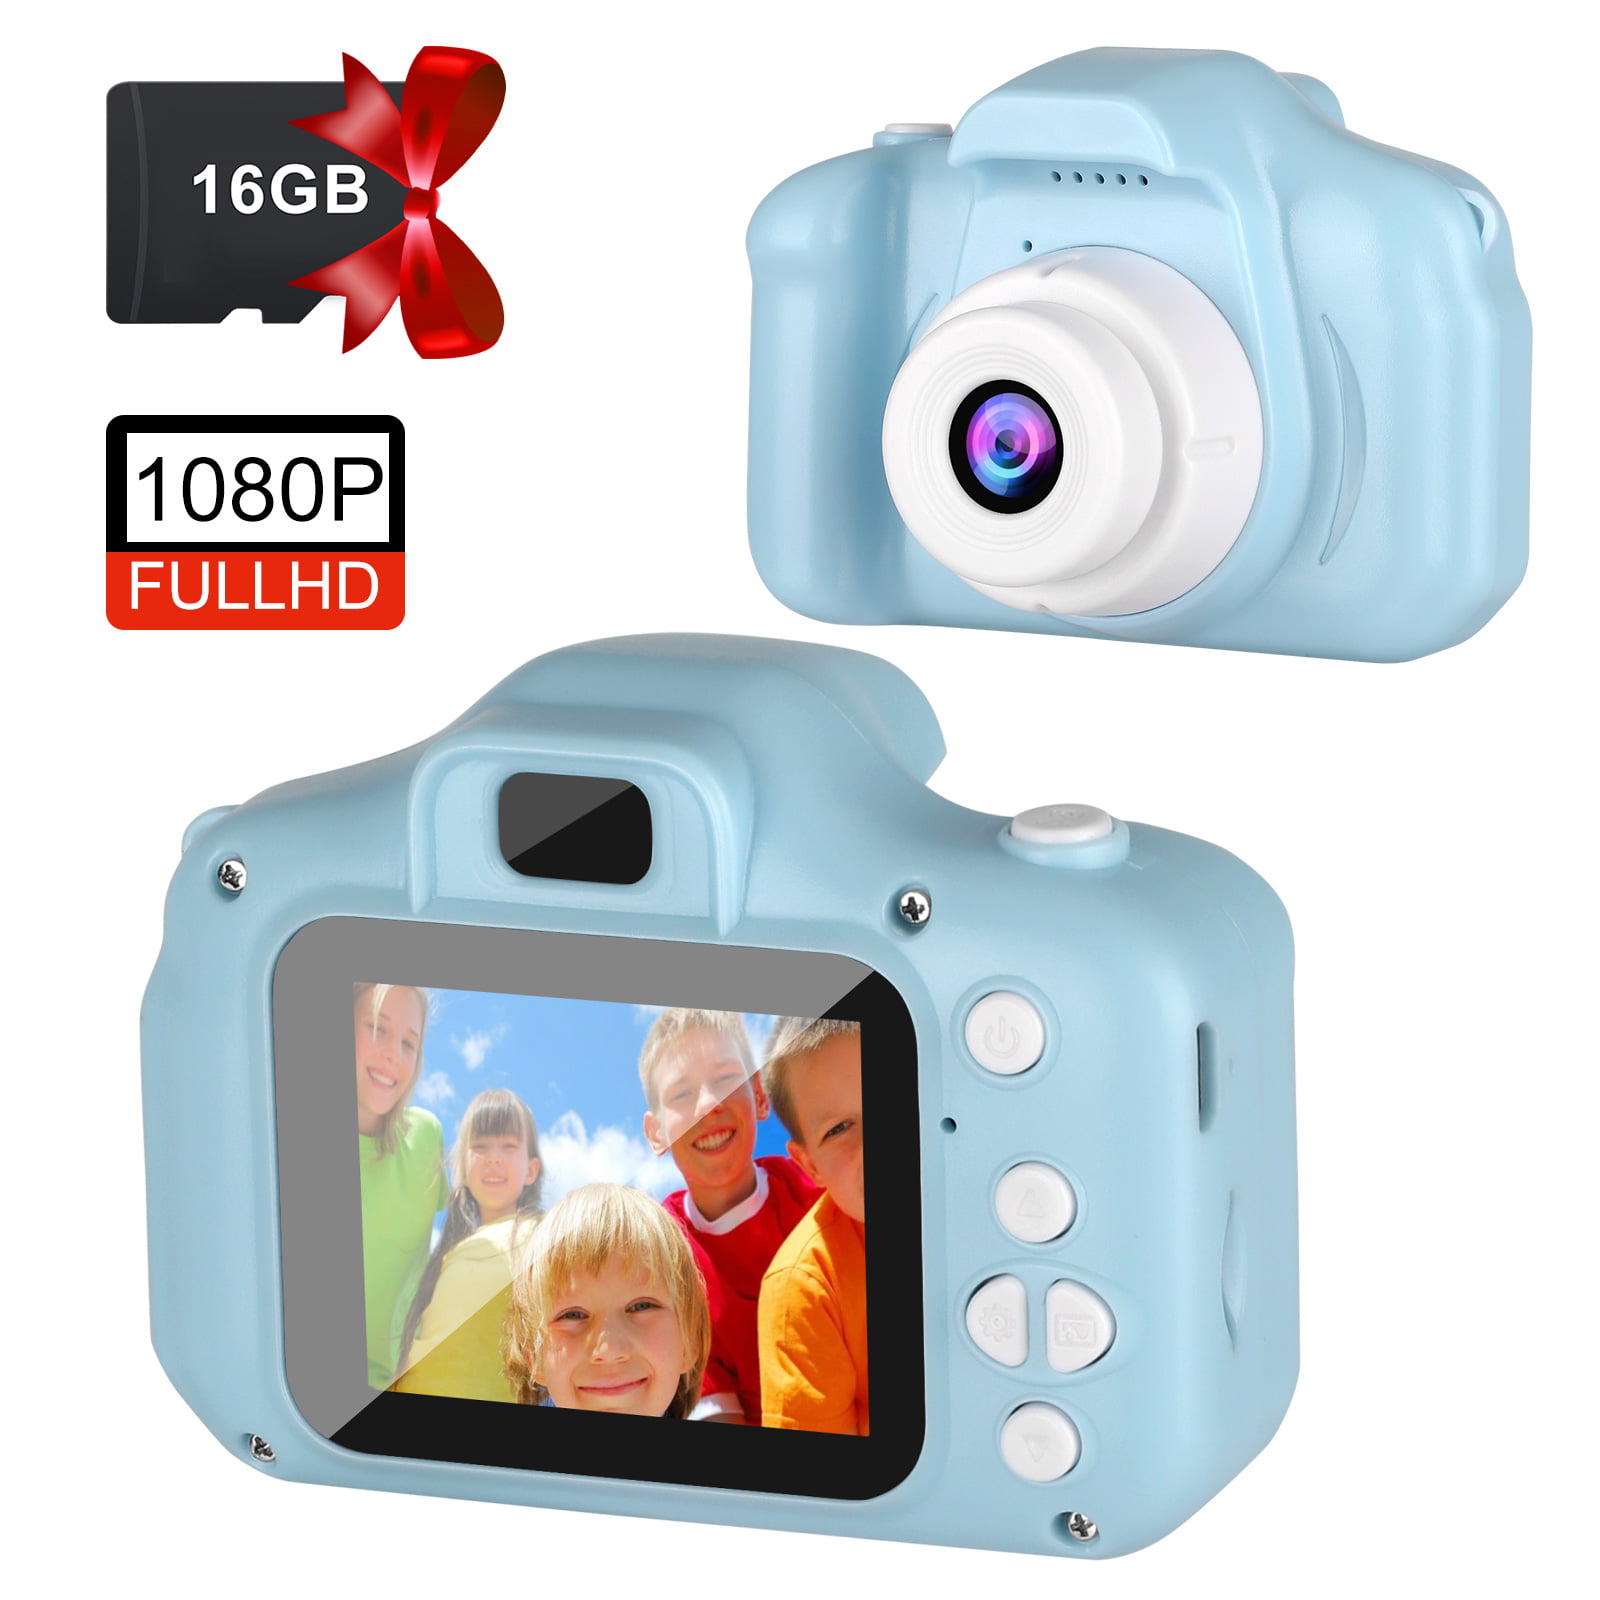 CHUNXU Kids Camera,Digital Video Camera for 3-10 Years Old Girls Boys,32GB SD Card Rechargeable Battery Compact Cameras for Children Birthday Blue